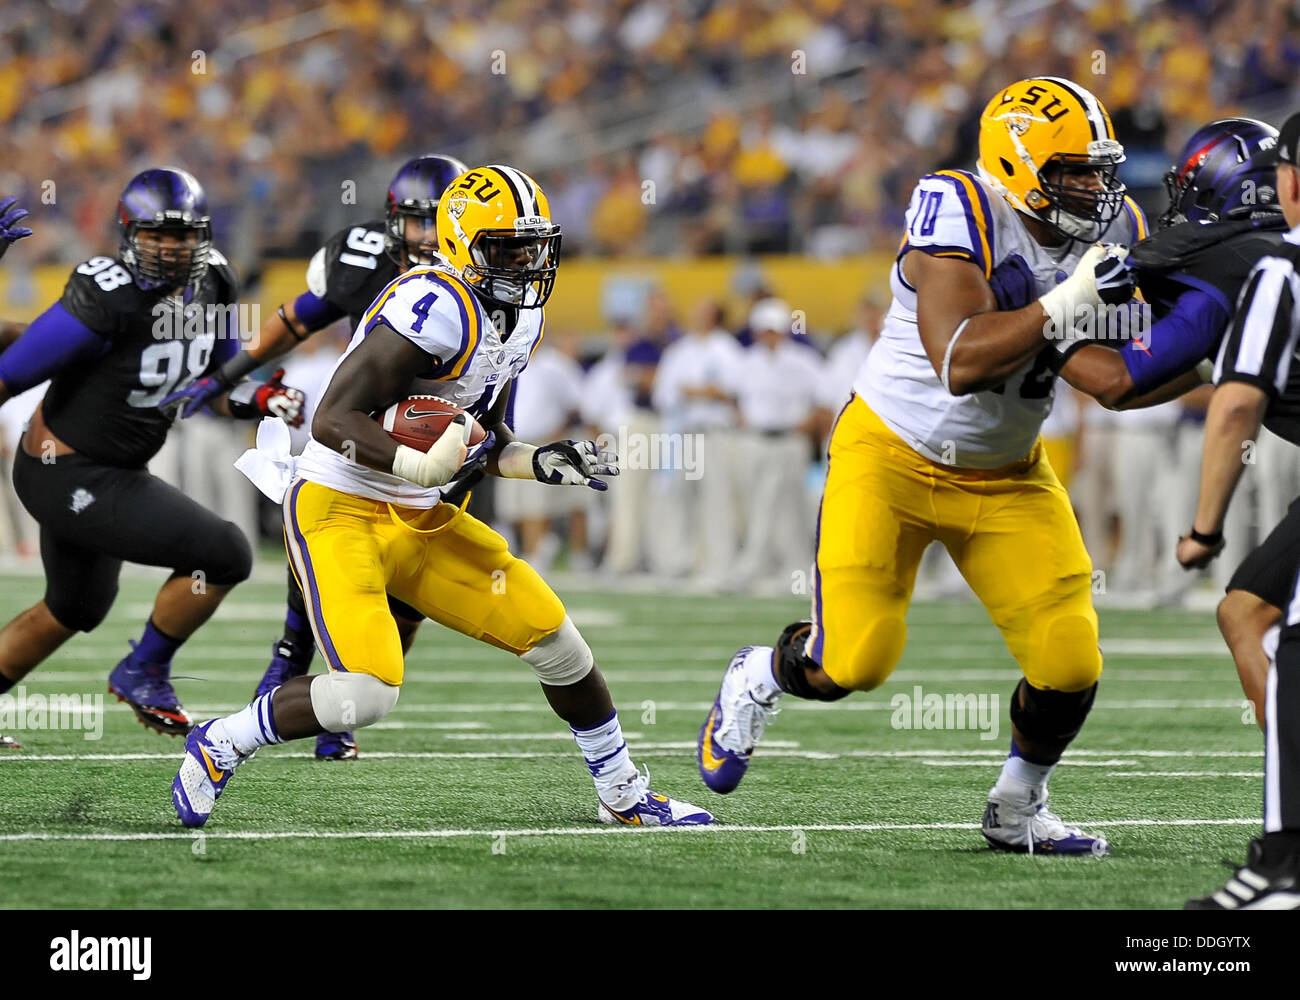 Aug. 31, 2013 - Aug. 31,2013:.LSU Tigers running back Alfred Blue (4) carries the ball inside the one as he gets blocking from LSU Tigers offensive tackle La'el Collins (70).in a NCAA football game between the LSU Tigers and the TCU Horned Frogs at AT&T Stadium in Arlington, Texas.. Stock Photo